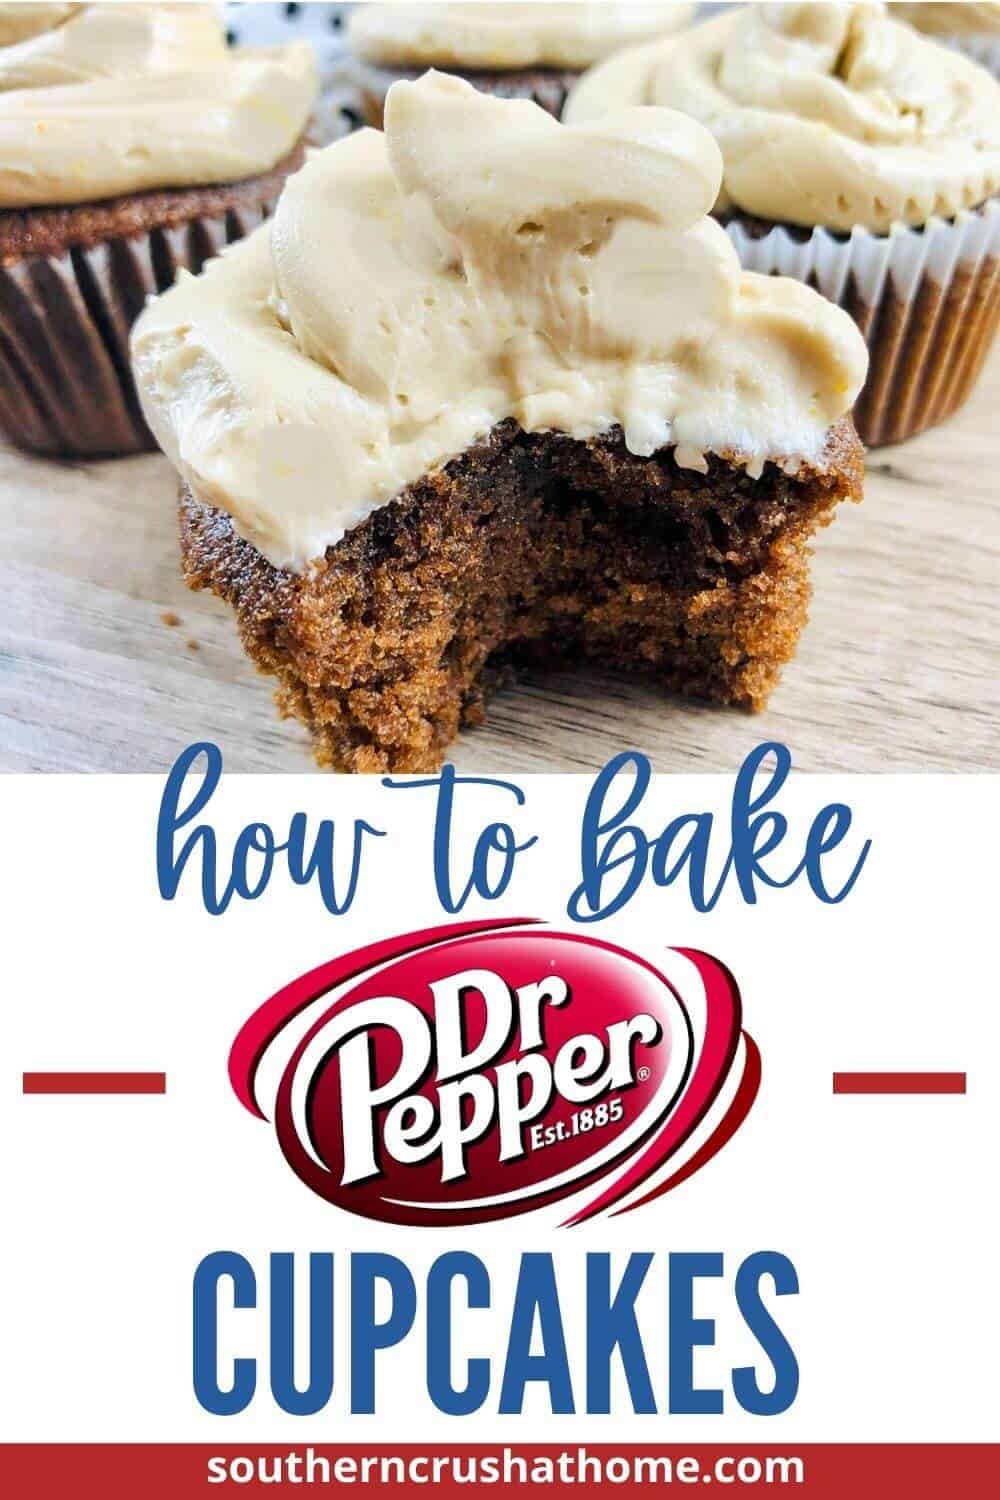 https://www.southerncrushathome.com/wp-content/uploads/2021/06/Dr-Pepper-Cupcakes.jpg